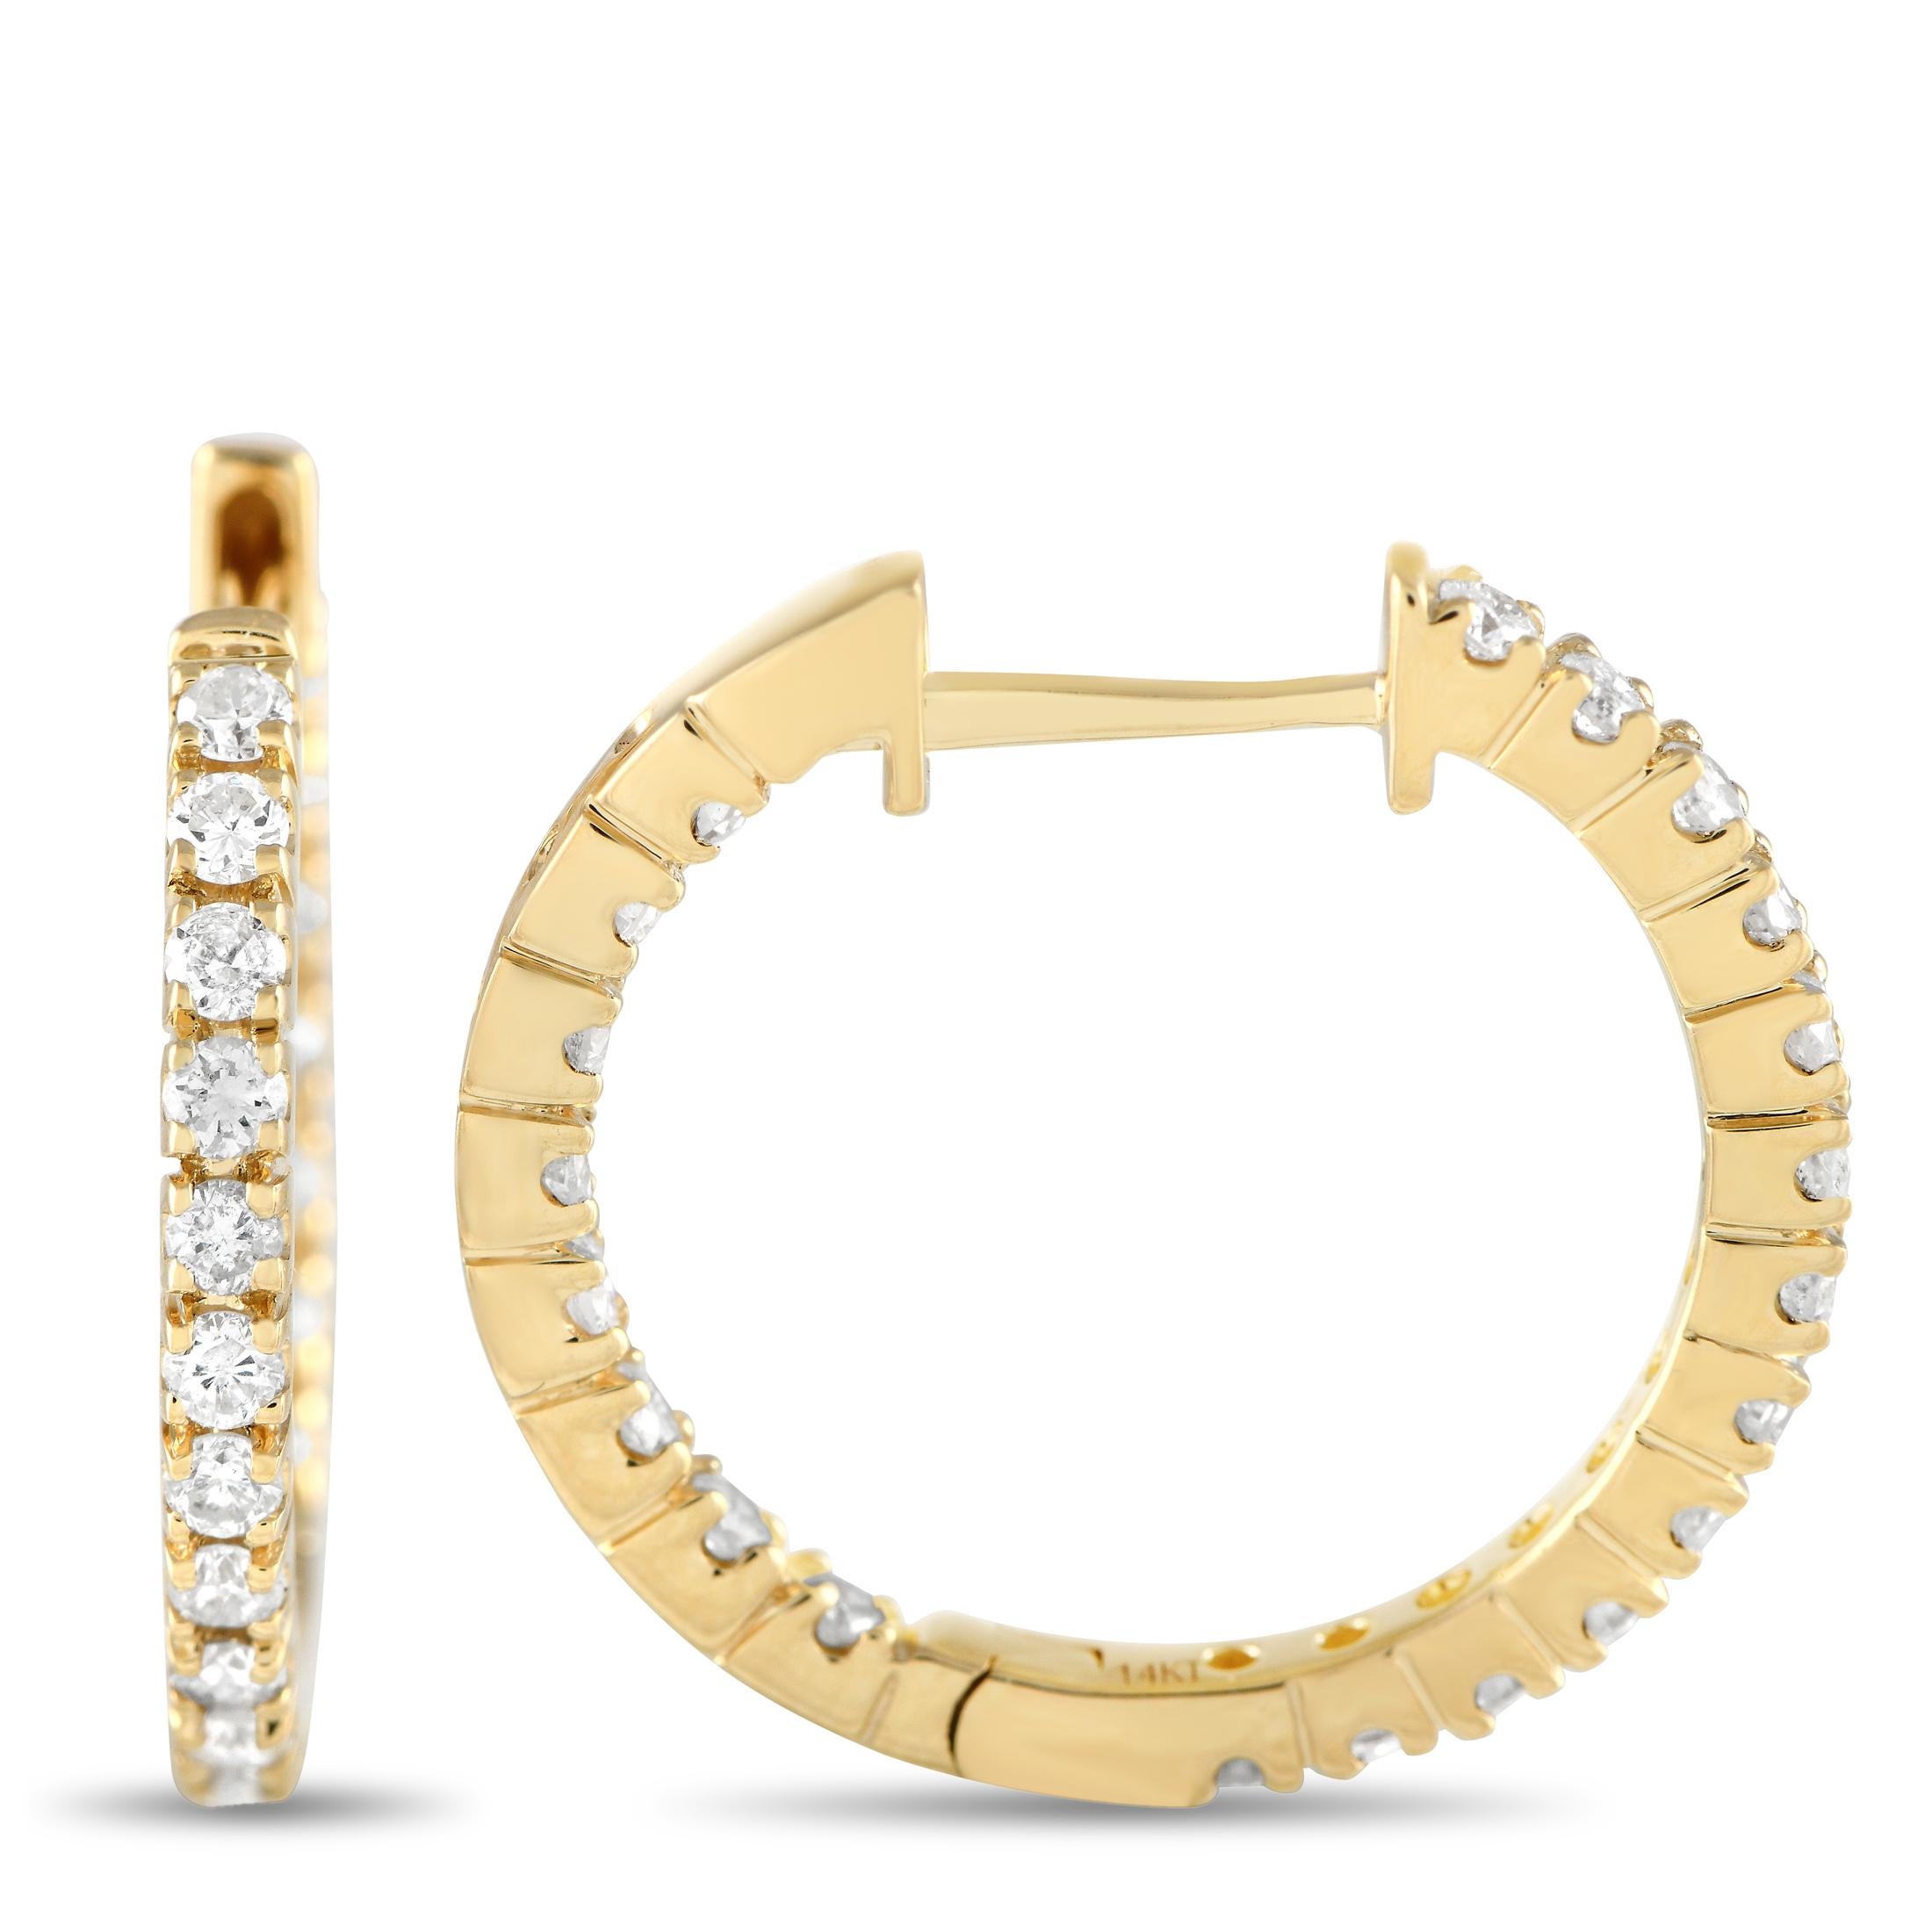 Add elegance to your everyday outfits with these diamond hoop earrings. Each hoop is crafted in 14K yellow gold and decorated with a row of diamonds on the front face and on the front-facing back side. Also called inside-out hoops, these sparkly